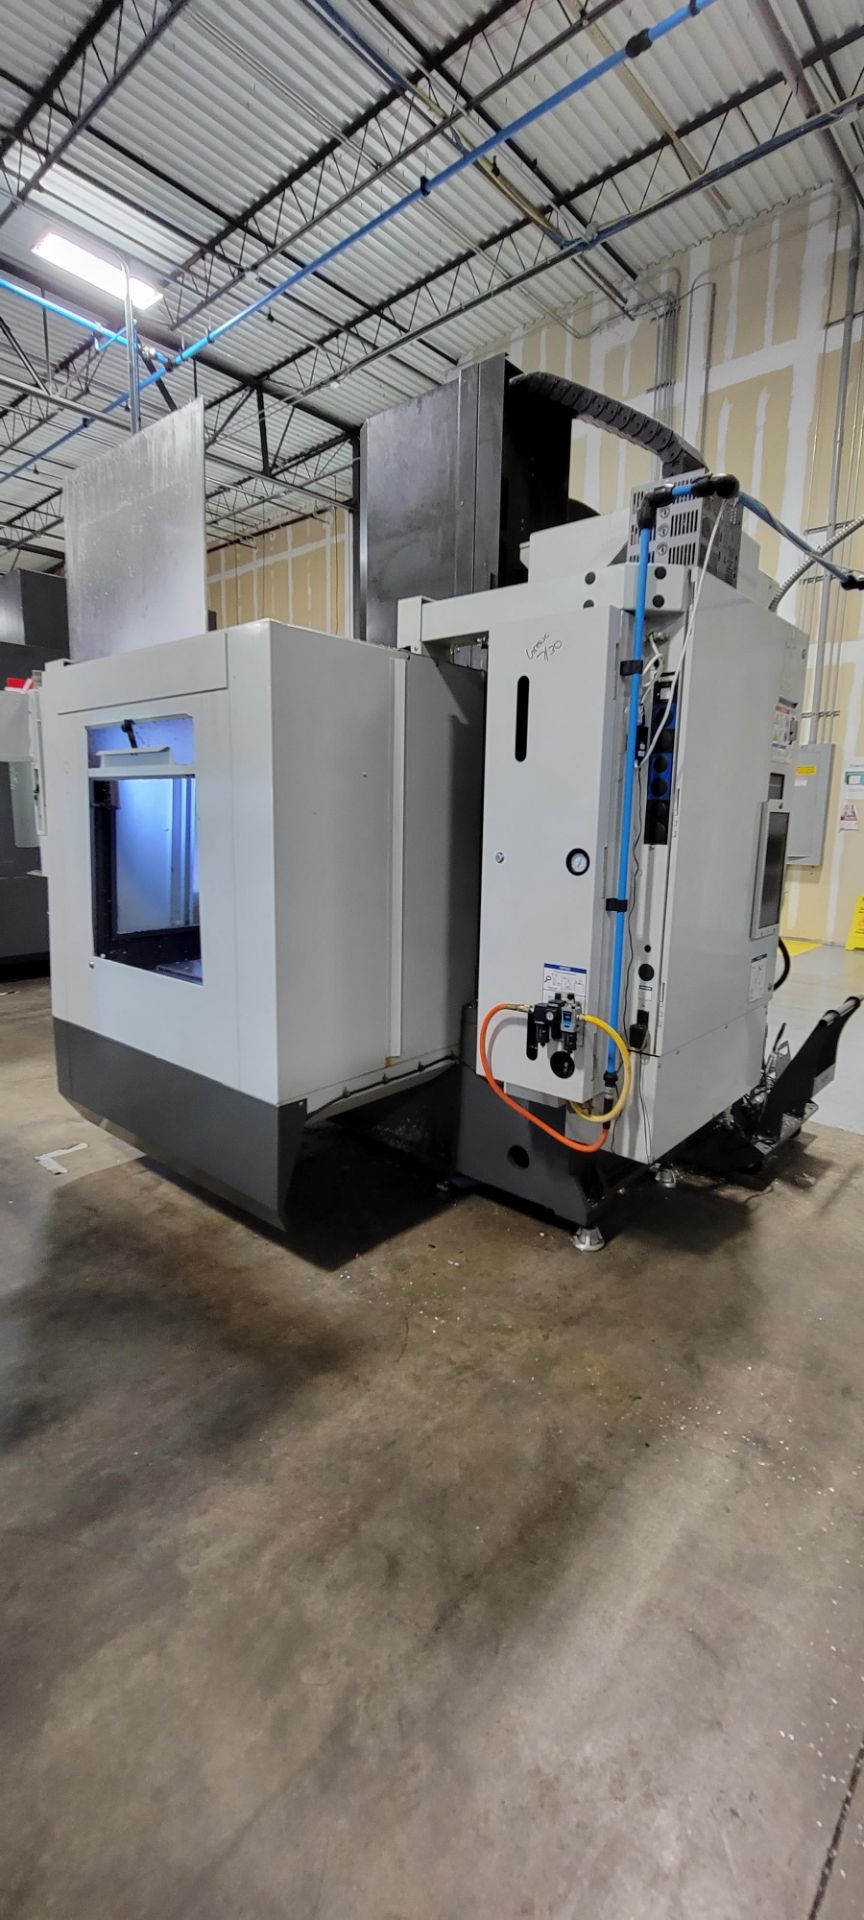 Haas VF-2SSYT 3-Axis CNC Vertical Machining Center - Image 20 of 21